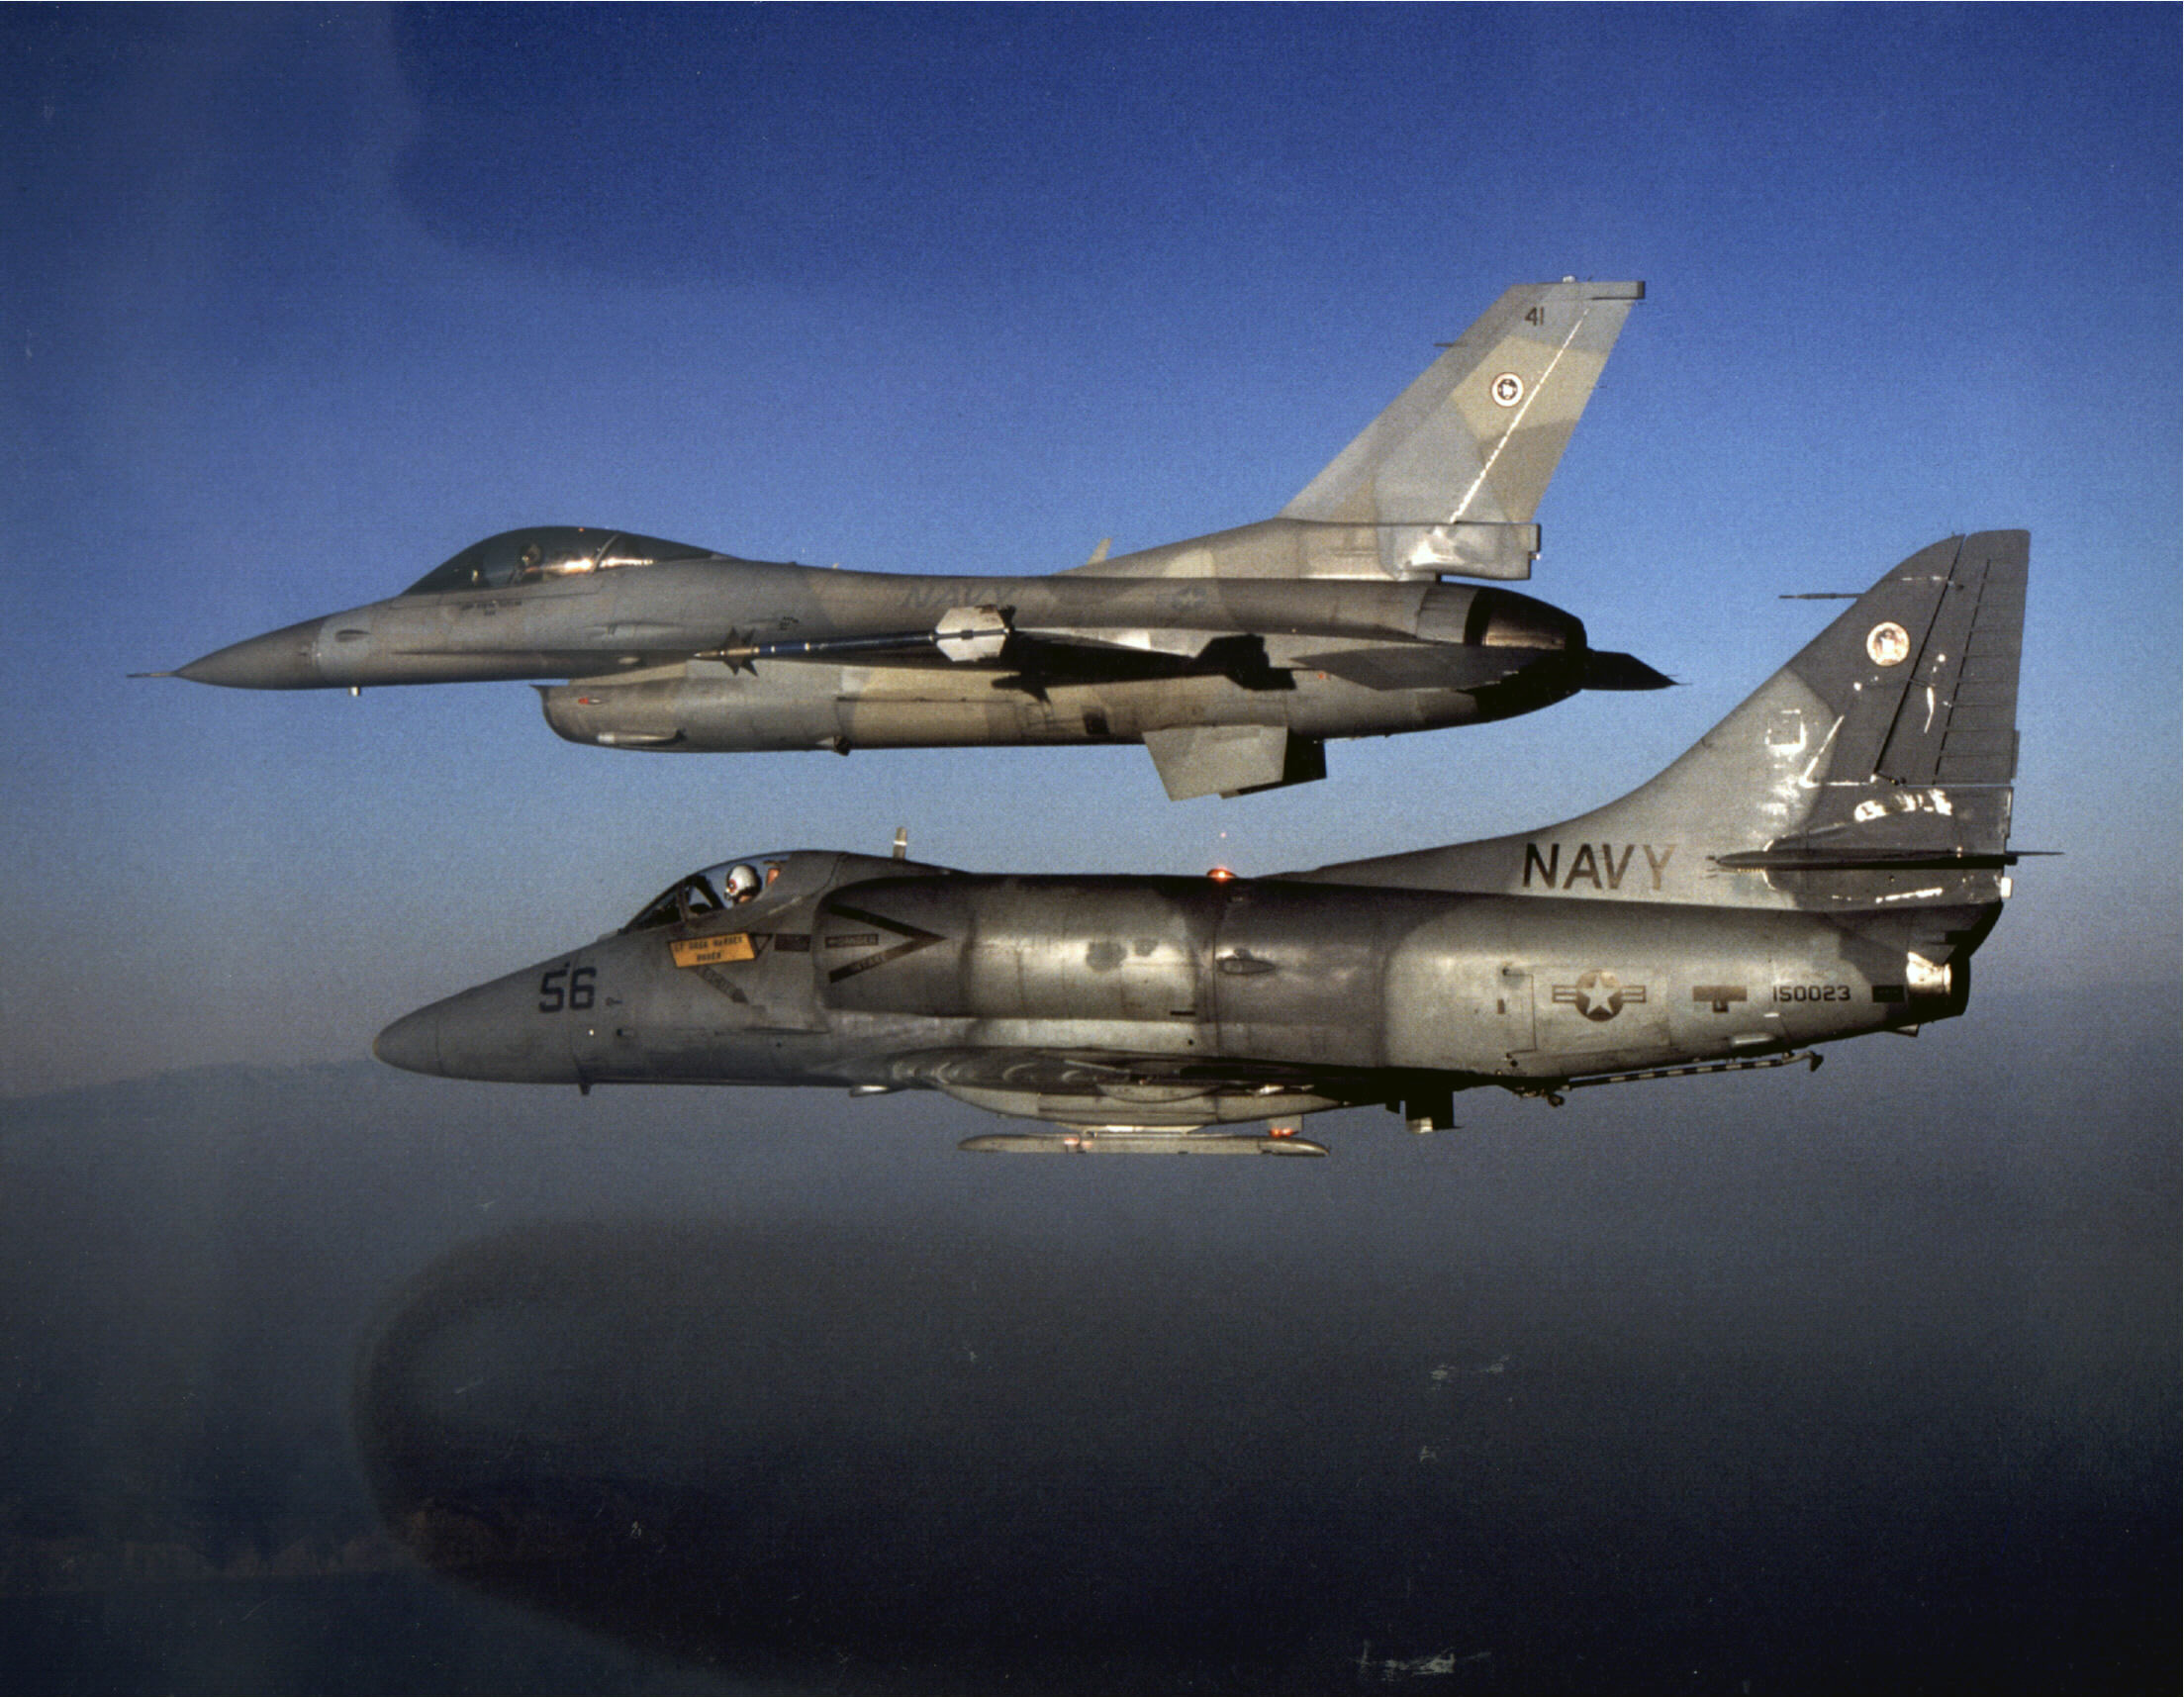 An A-4E Skyhawk (foreground) and F-16N Viper, both assigned as aggressor aircraft at the Navy Fighter Weapons School (TOPGUN) pictured in flight near San Clemente Island off the coast of California in 1989. (Robert L. Lawson Photograph Collection, National Naval Aviation Museum)